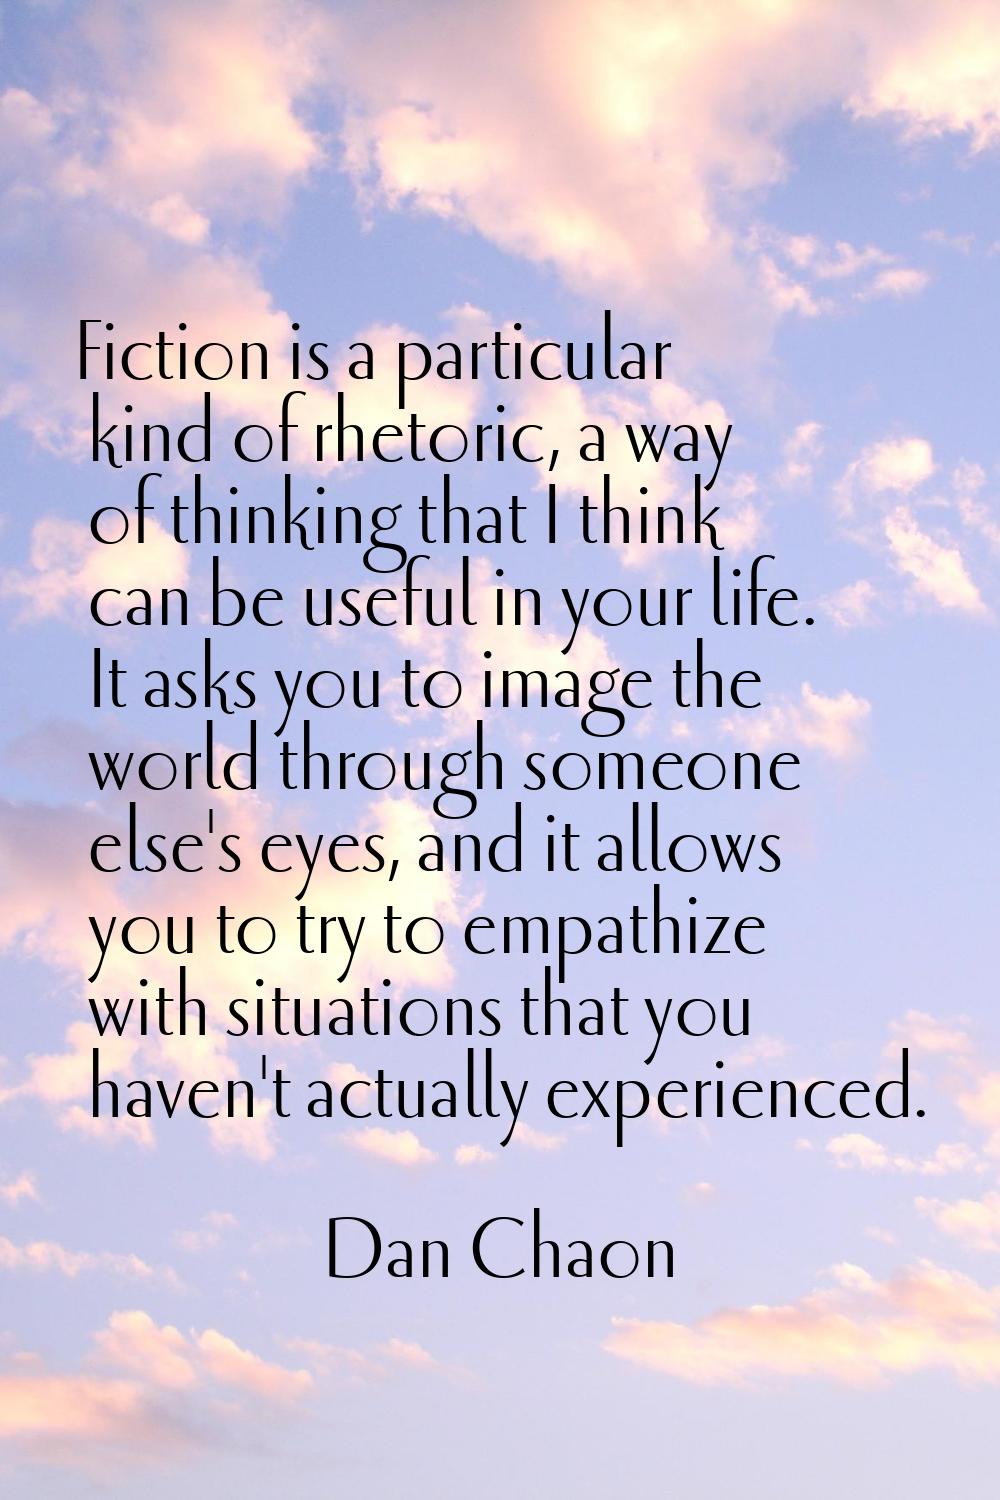 Fiction is a particular kind of rhetoric, a way of thinking that I think can be useful in your life